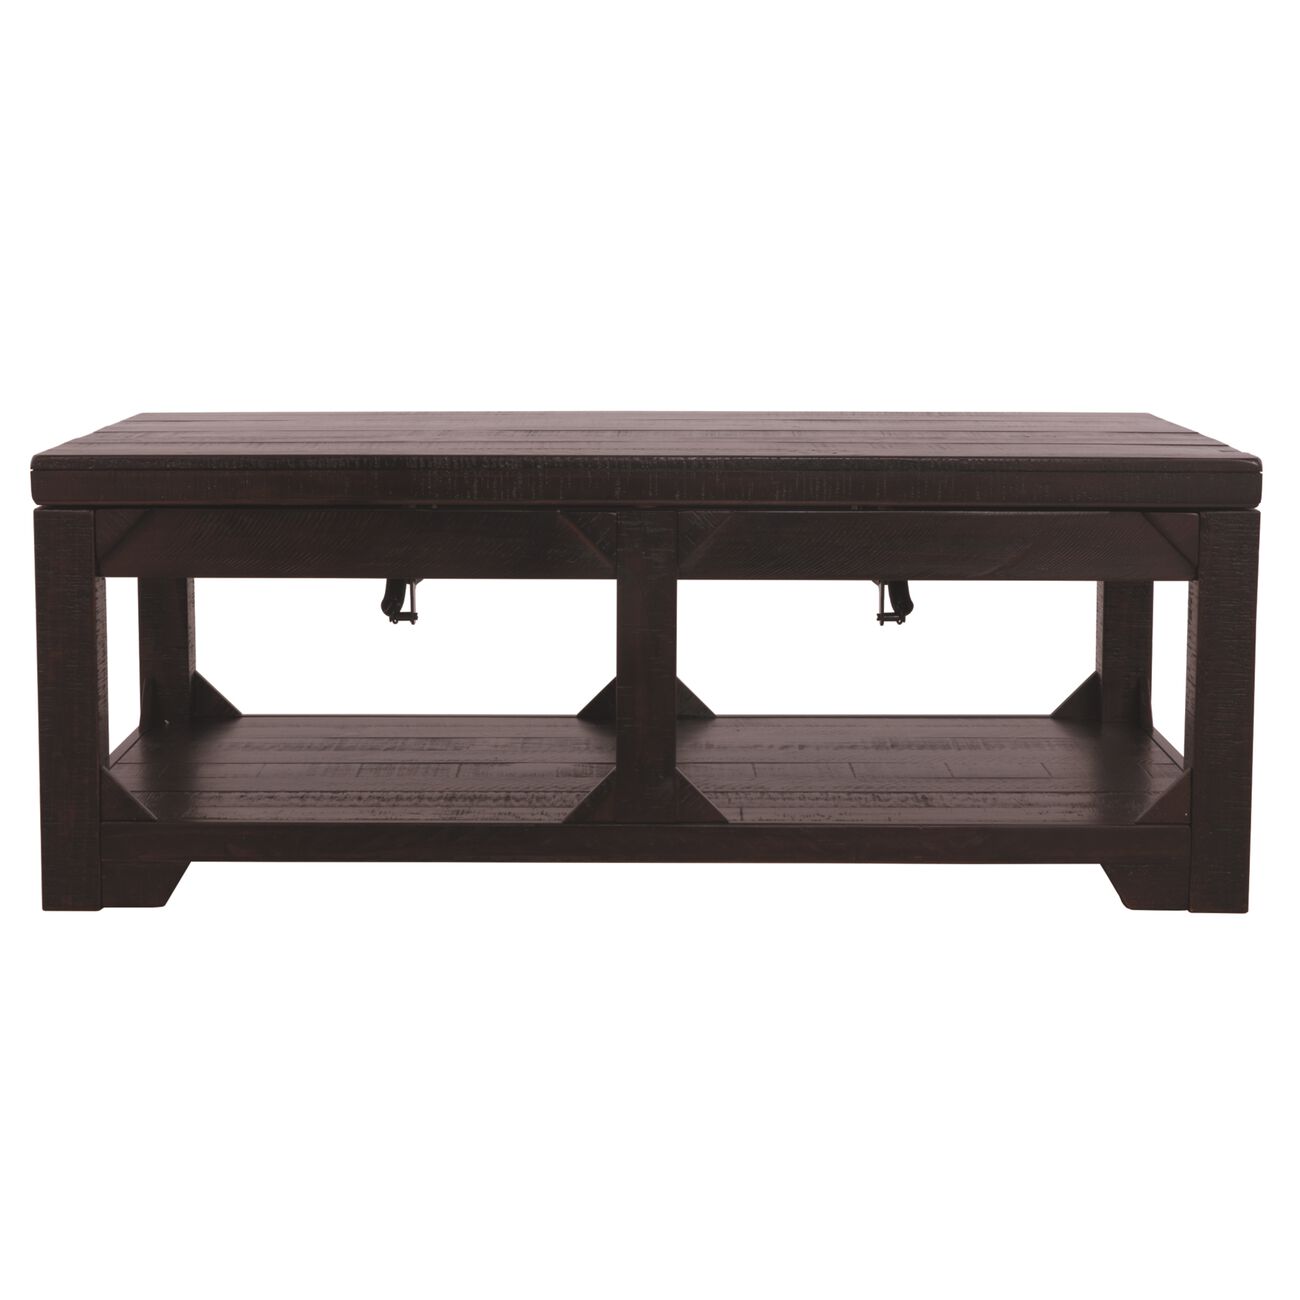 Wooden Lift Top Coffee Table with One Open Shelf, Brown